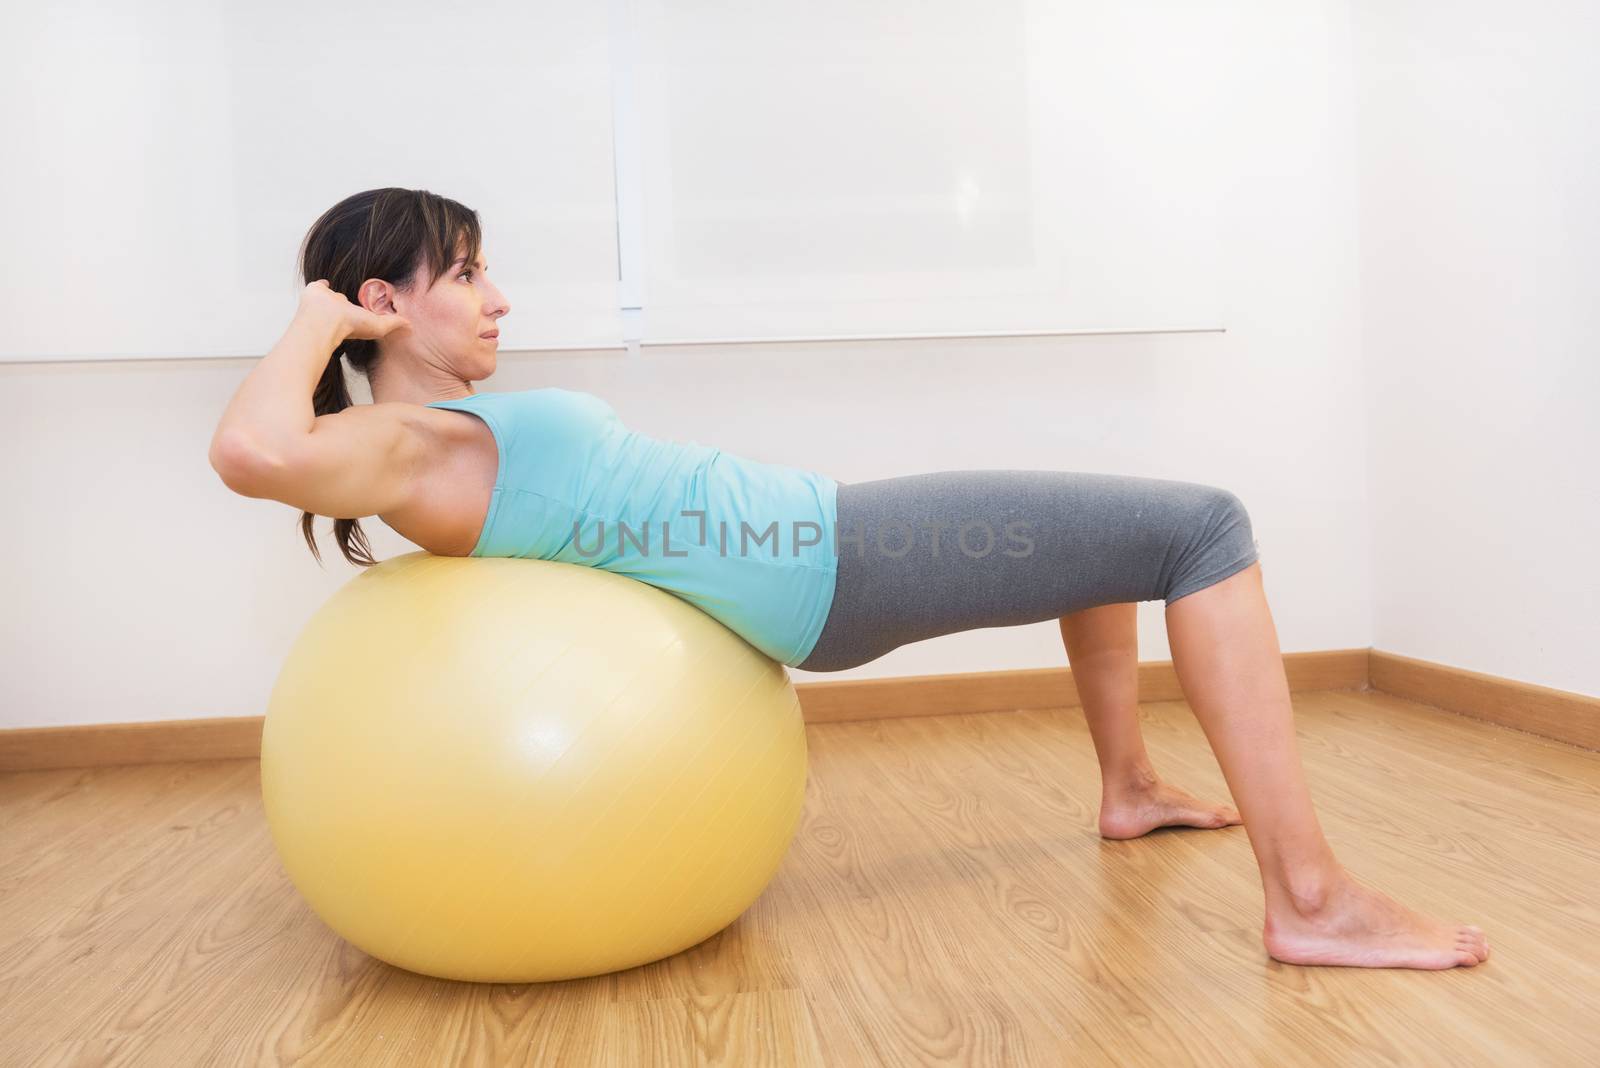 Fitness woman in gym on pilates ball. Young woman doing exercise on fitness ball.